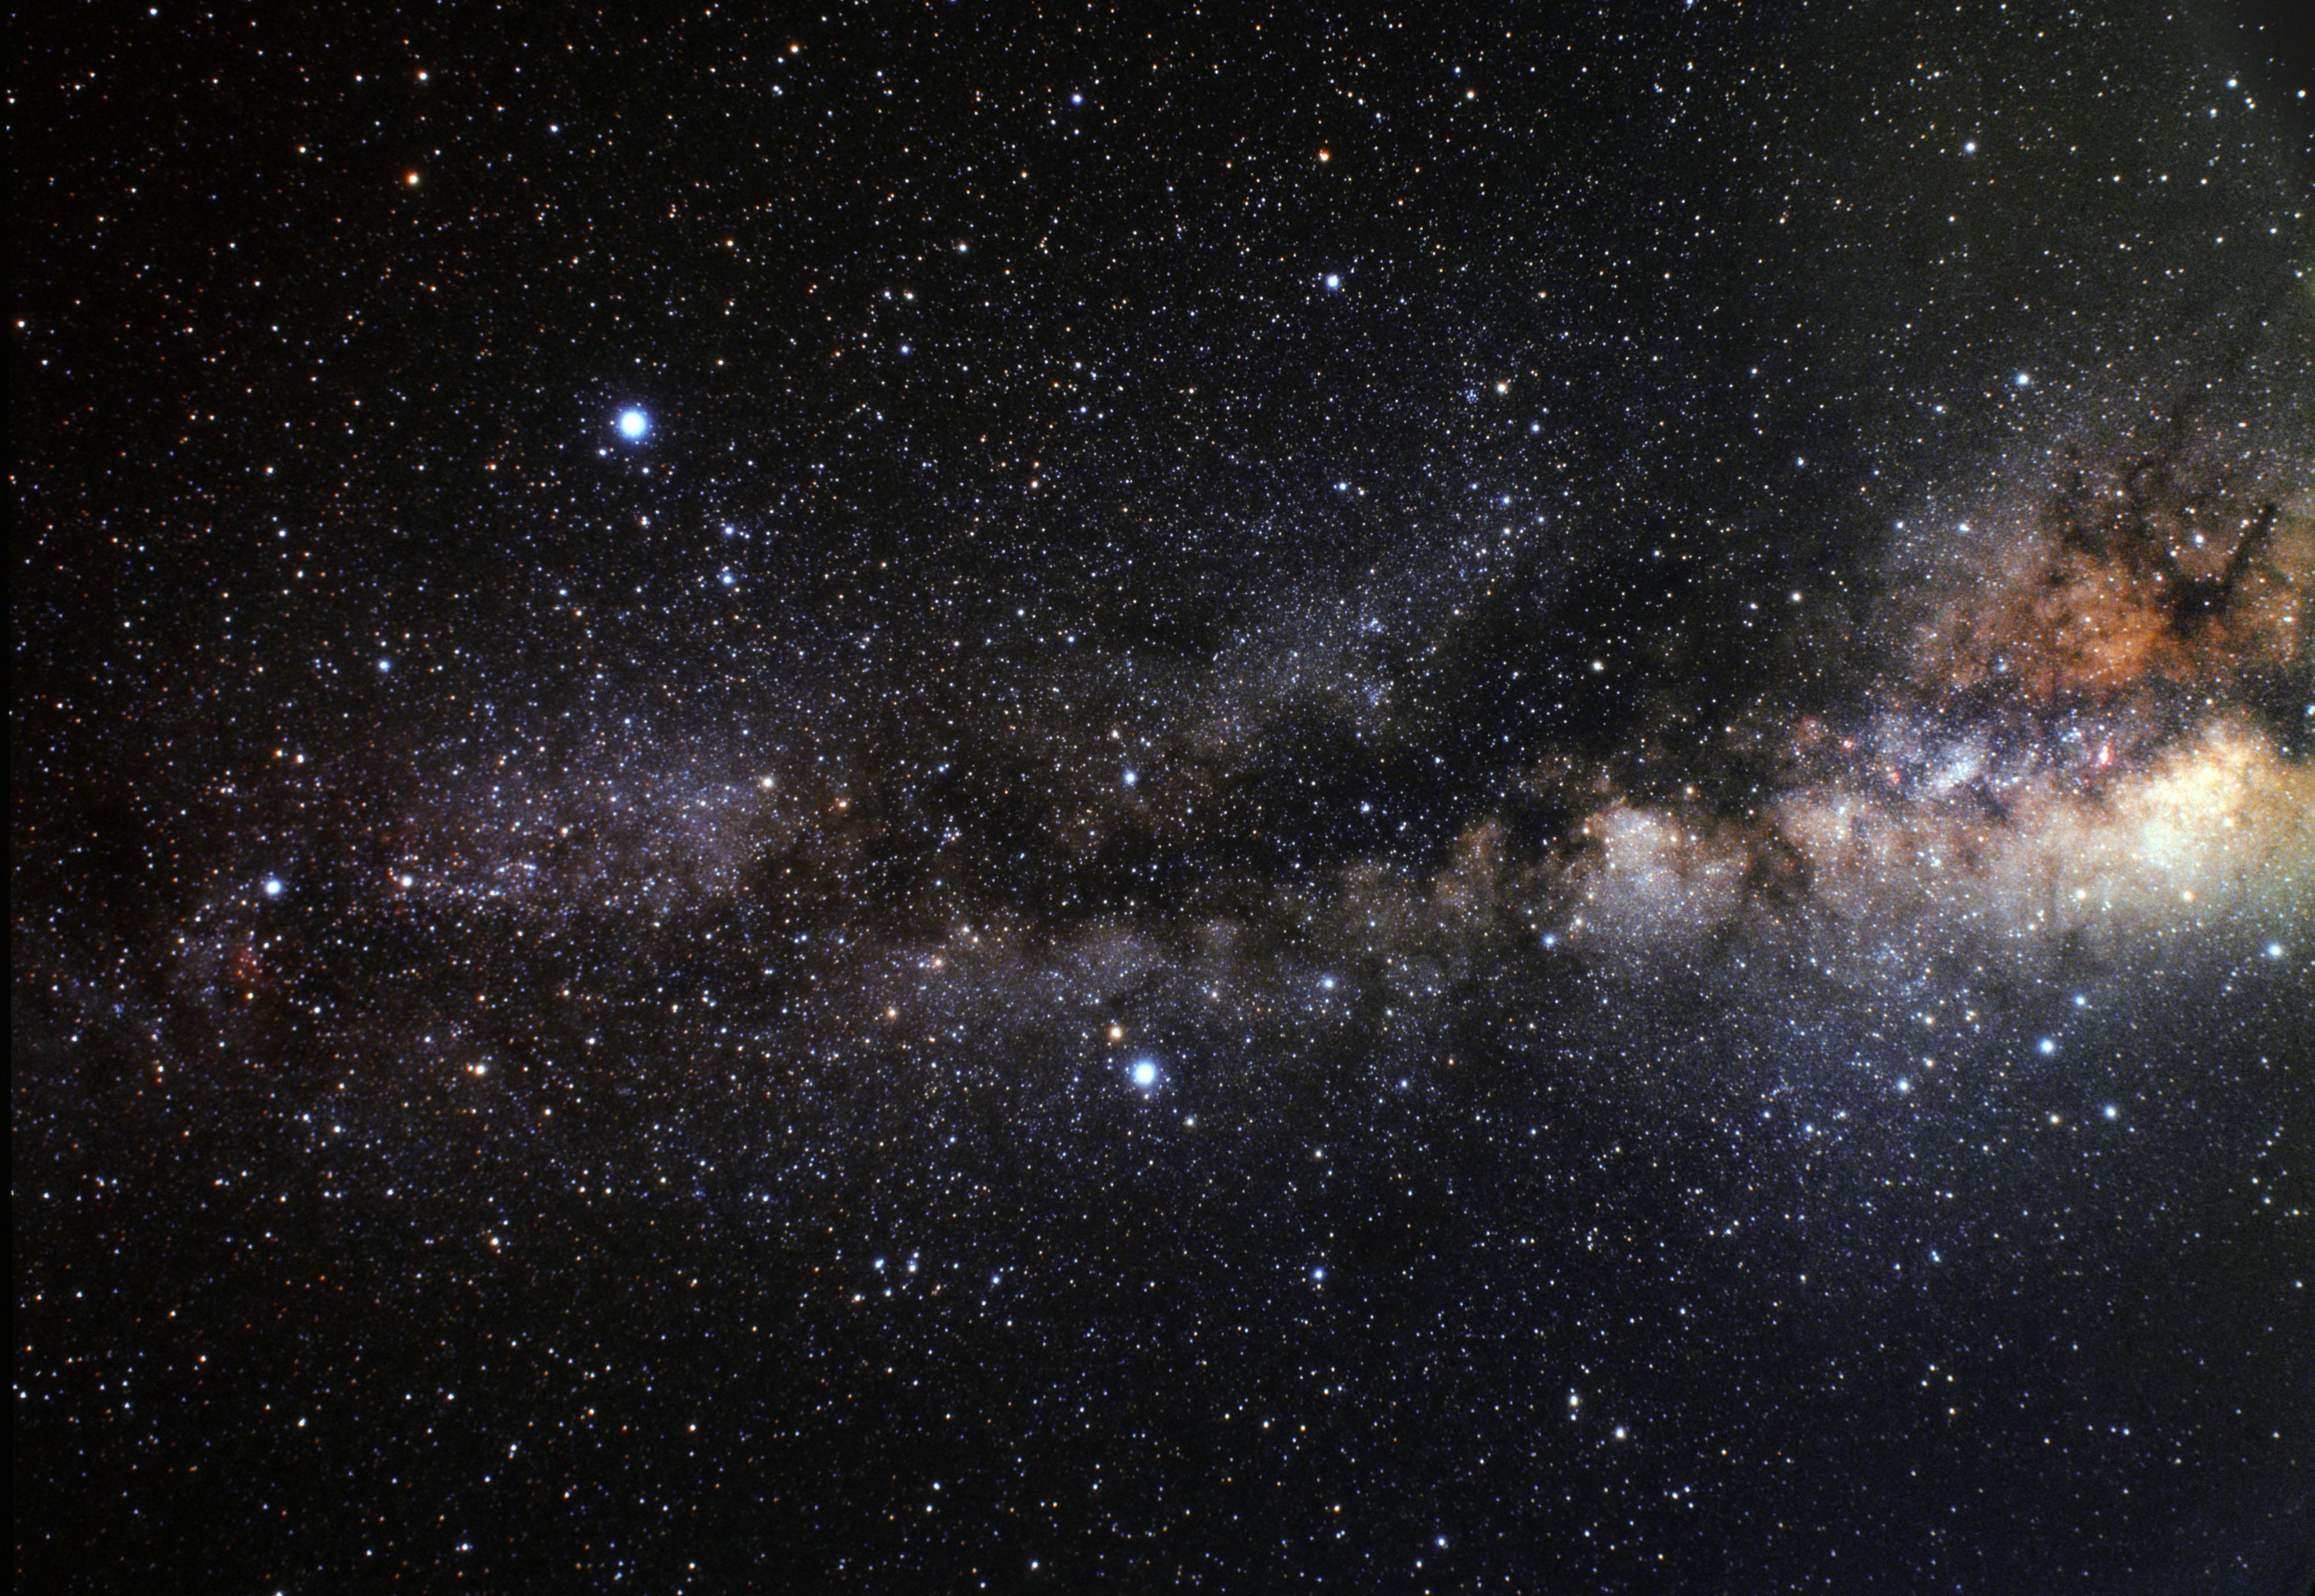 Thick dust clouds block our night time view of the Milky Way creating